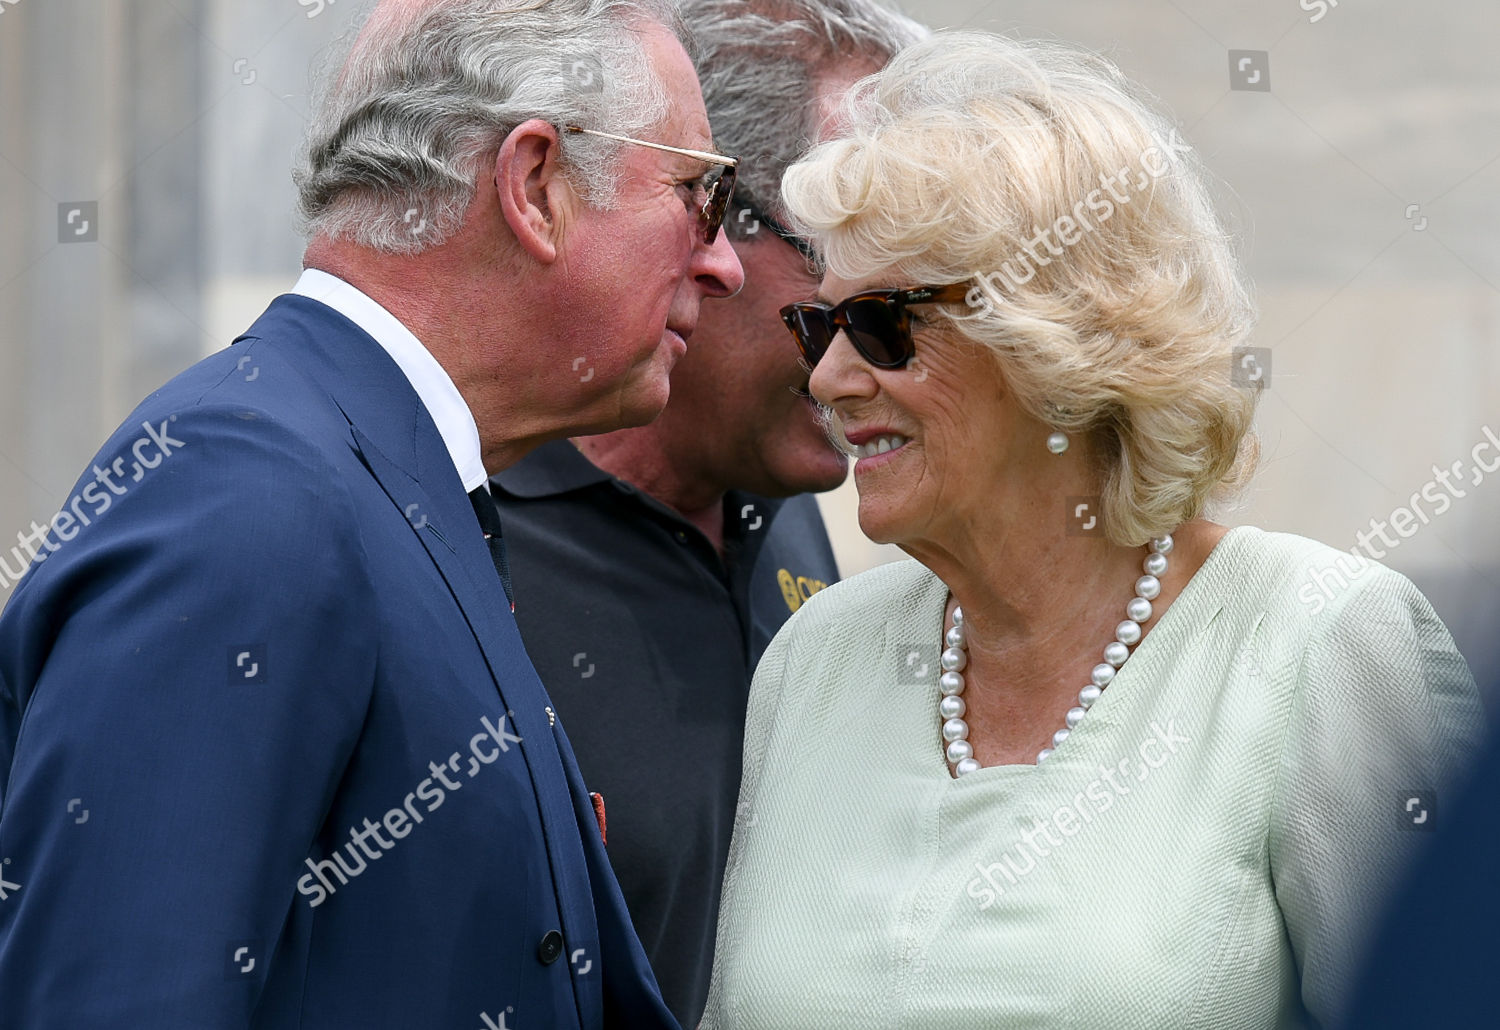 prince-charles-and-camilla-duchess-of-cornwall-visit-to-athens-greece-shutterstock-editorial-9667468b.jpg